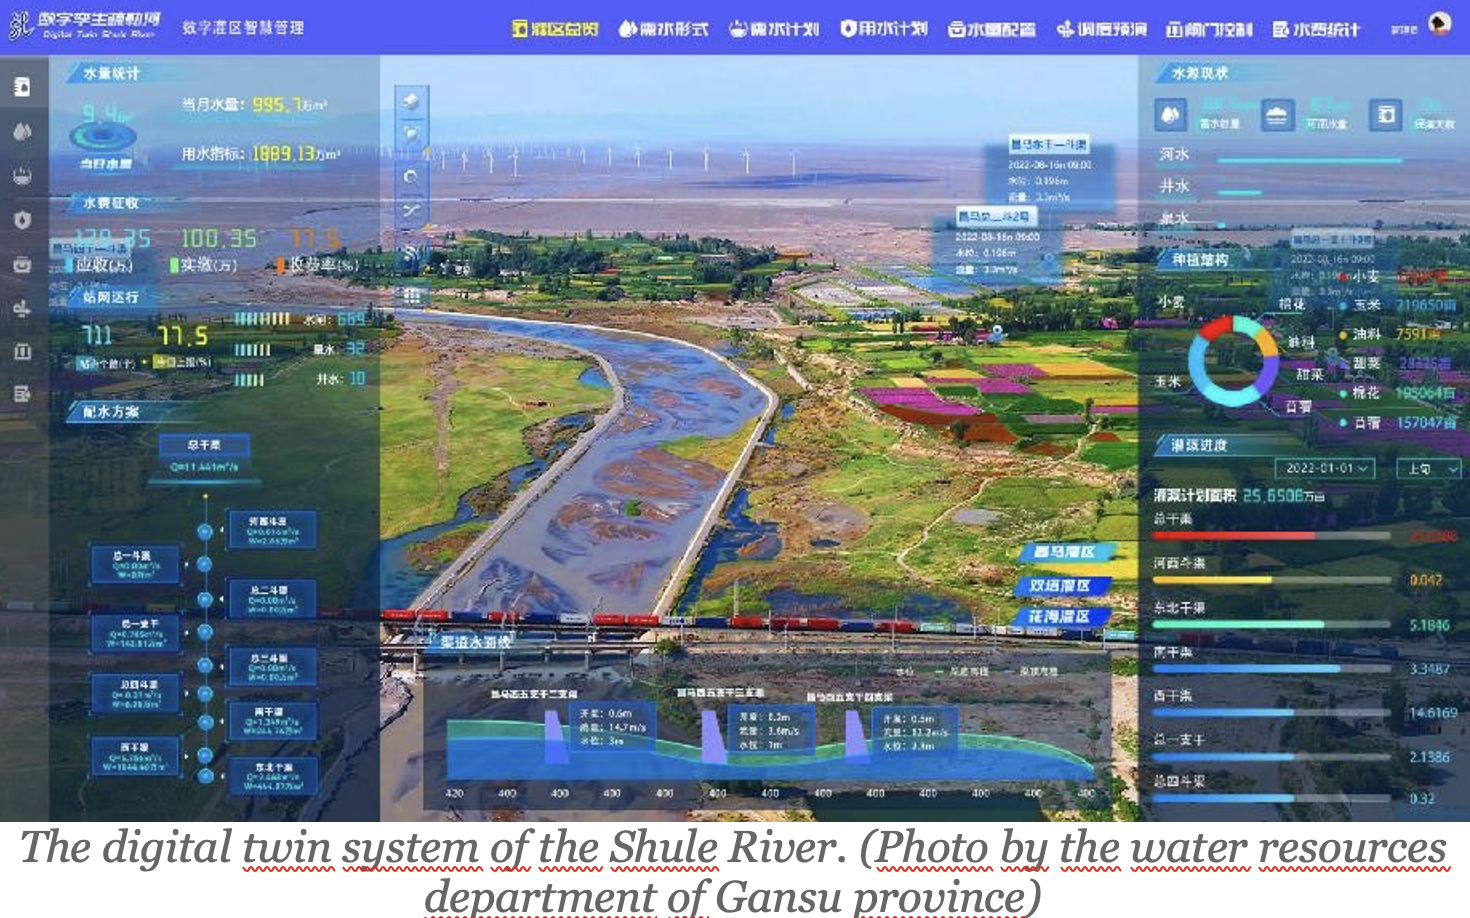 China’s Gansu province powers water conservancy with digital twin technology